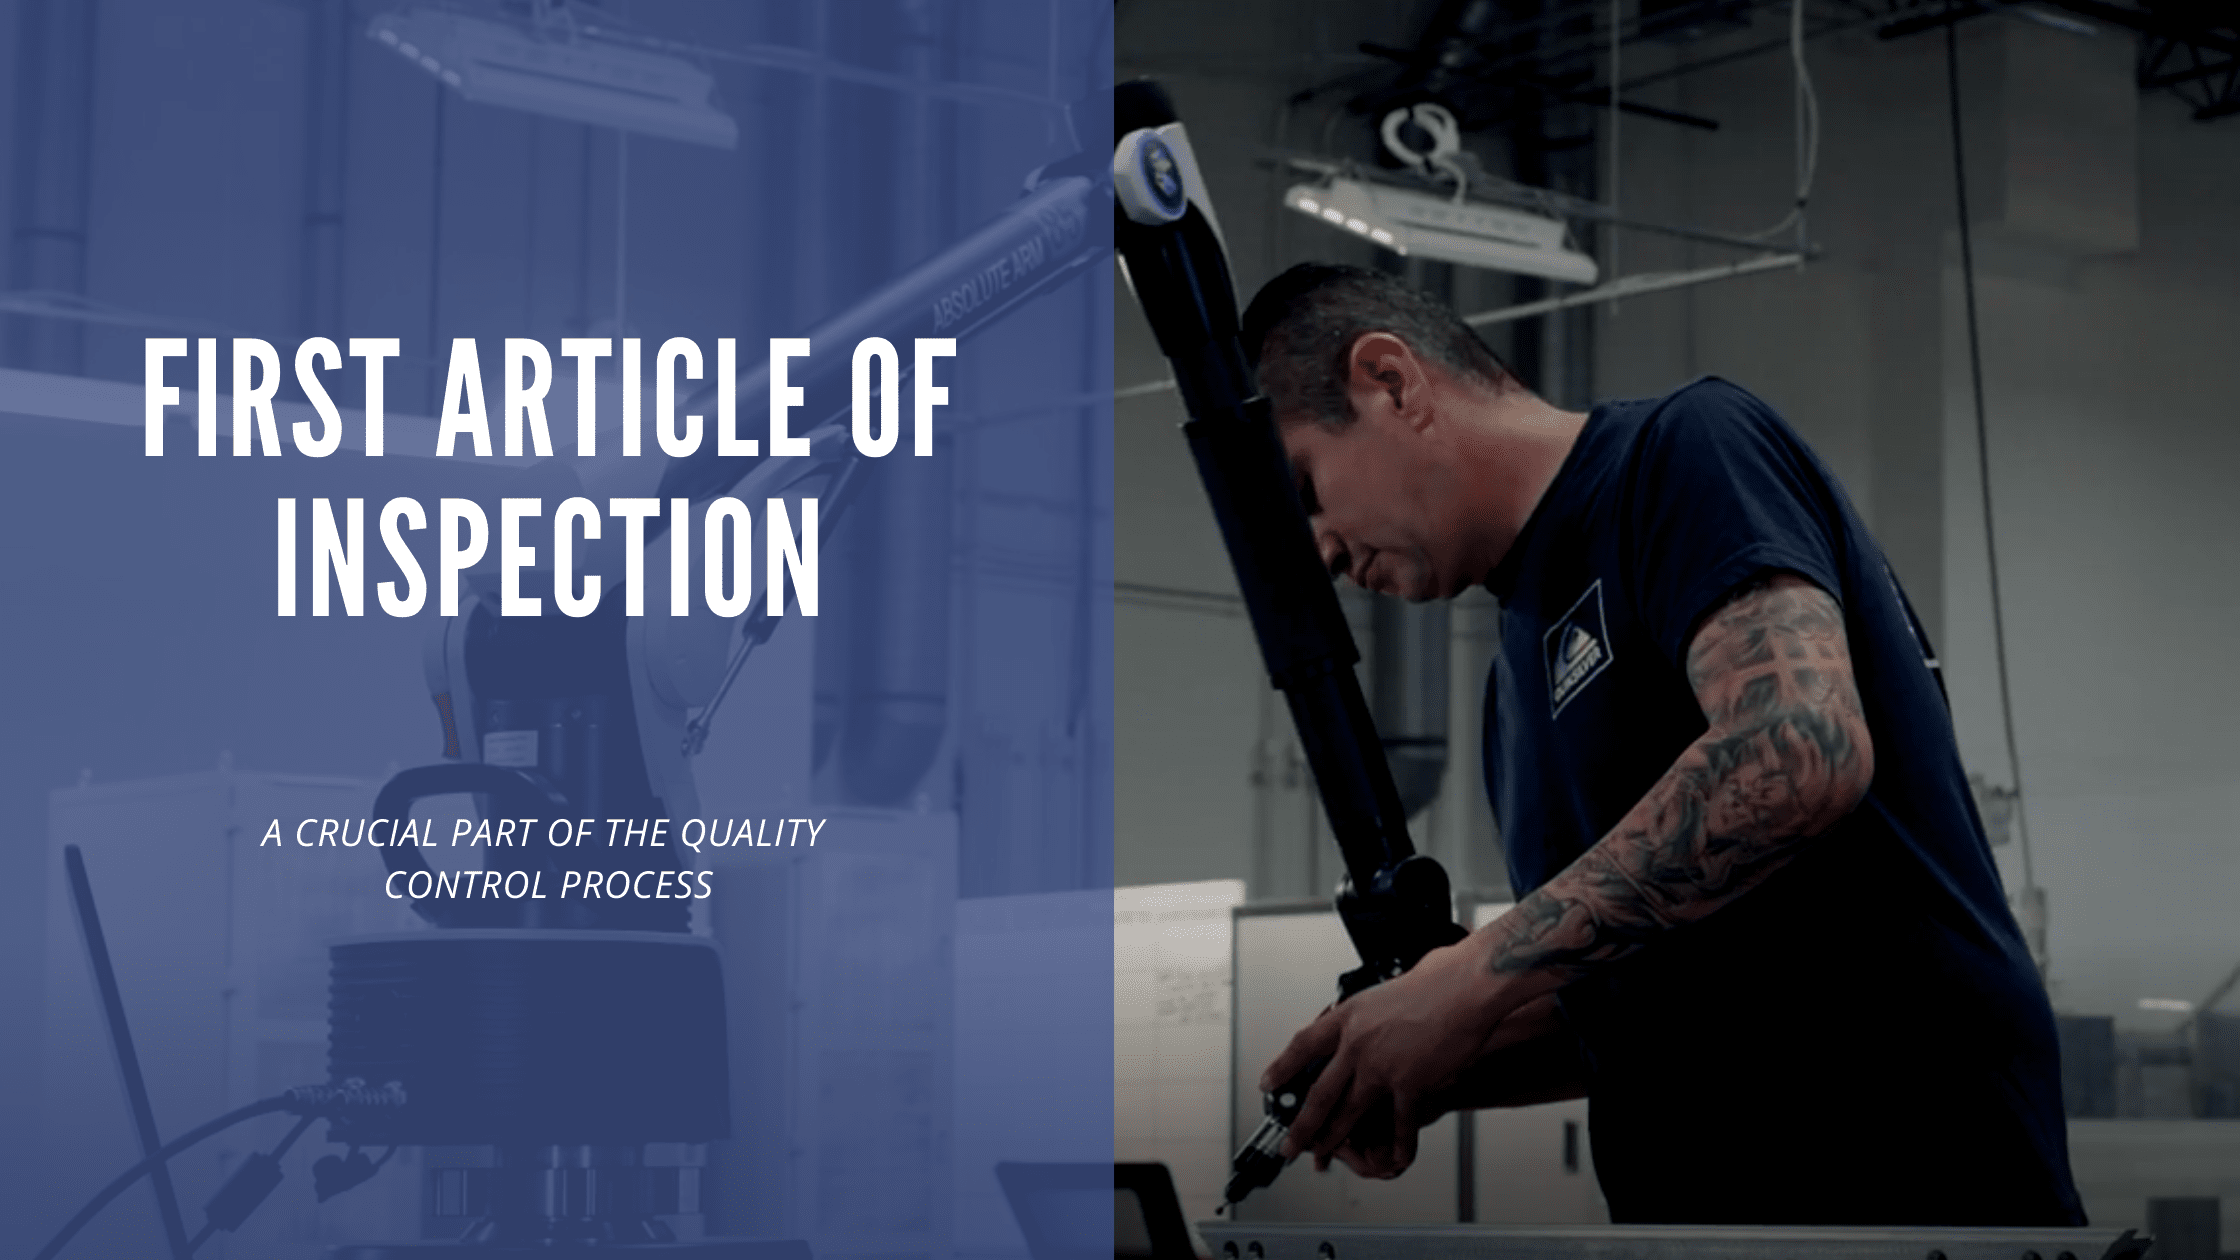 First Article of Inspection: A Crucial Part of the Quality Control Process